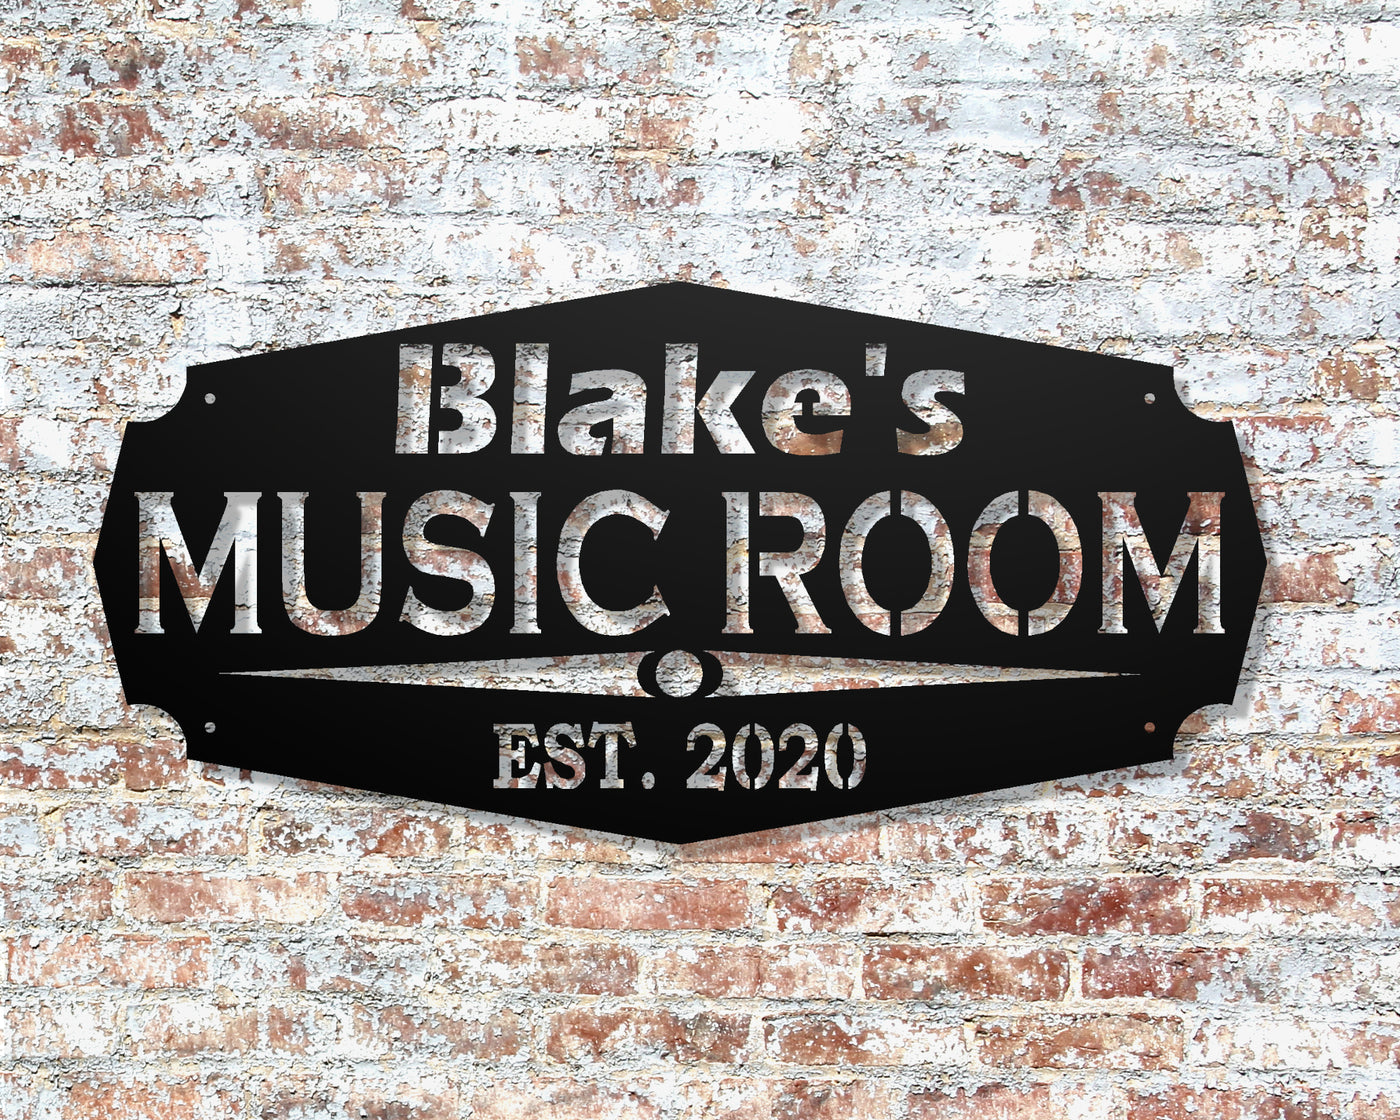 Personalized Music Room Metal Sign with Name and EST. Date - Madison Iron and Wood - Personalized sign - metal outdoor decor - Steel deocrations - american made products - veteran owned business products - fencing decorations - fencing supplies - custom wall decorations - personalized wall signs - steel - decorative post caps - steel post caps - metal post caps - brackets - structural brackets - home improvement - easter - easter decorations - easter gift - easter yard decor